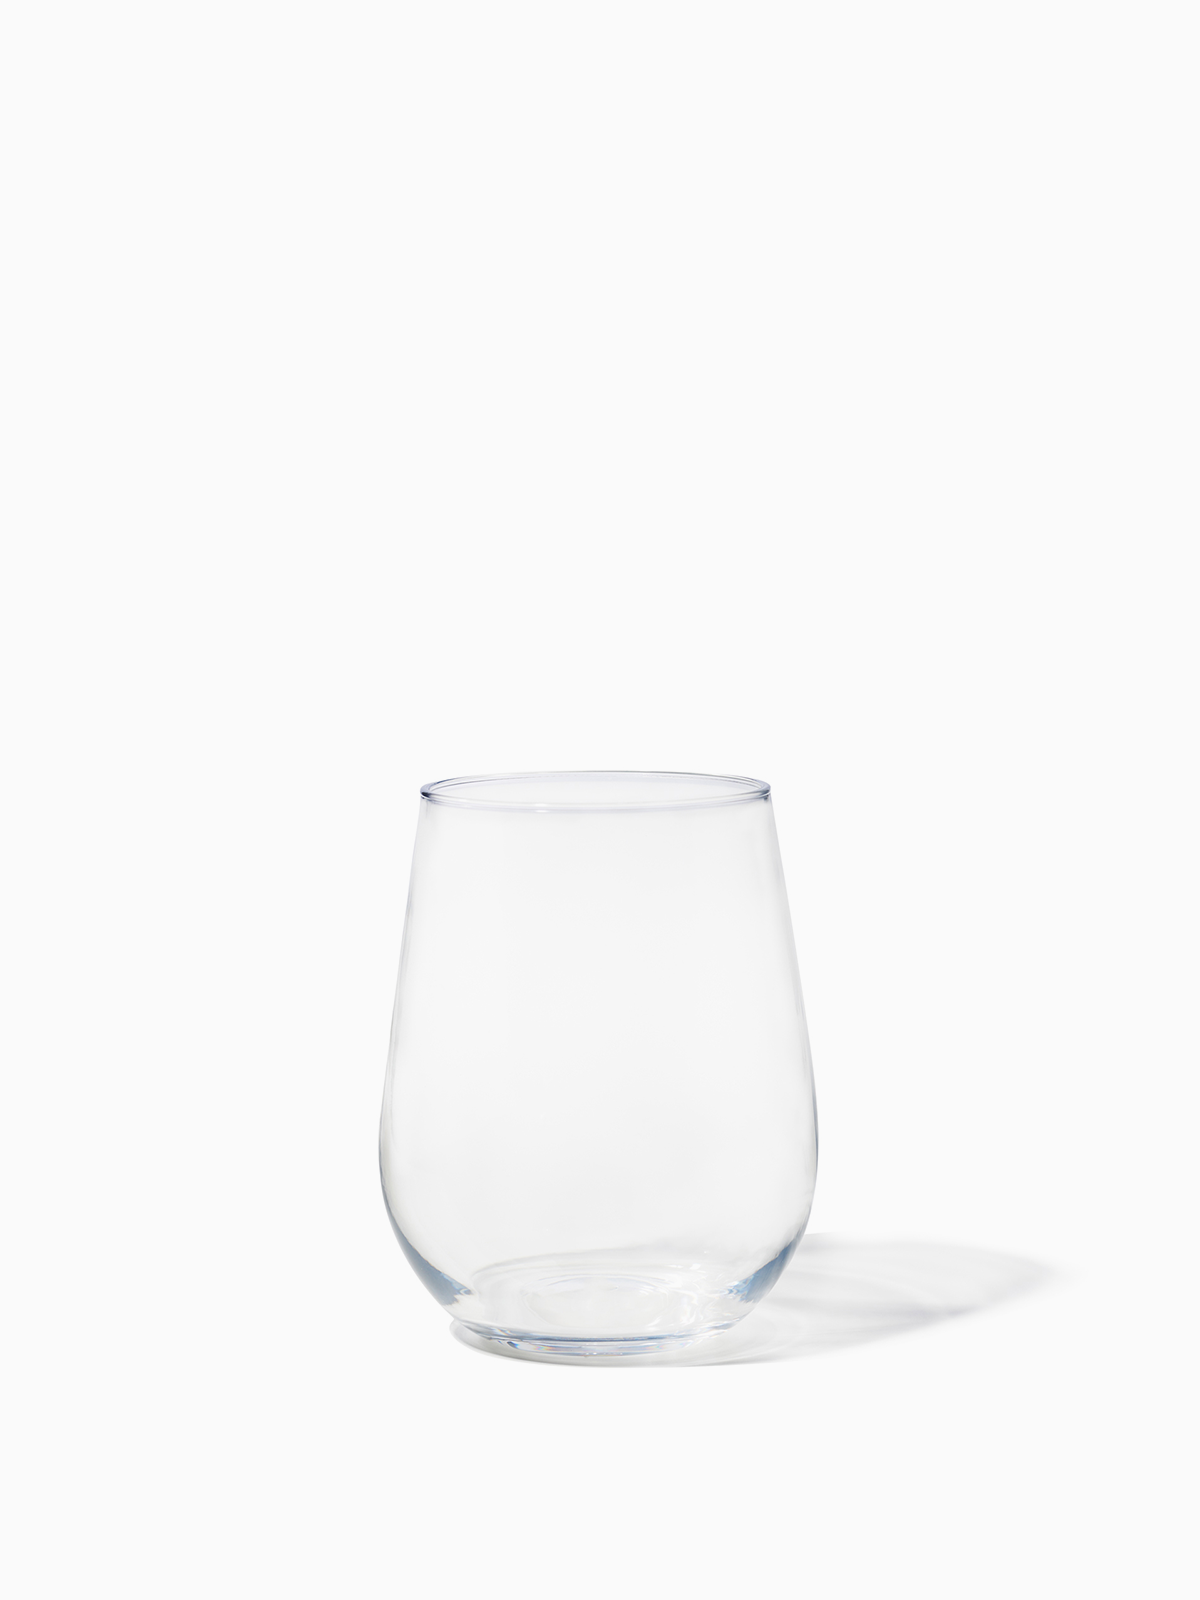 Visions 8 oz. Heavy Weight Clear Plastic Stemless Wine Glass - 16/Pack